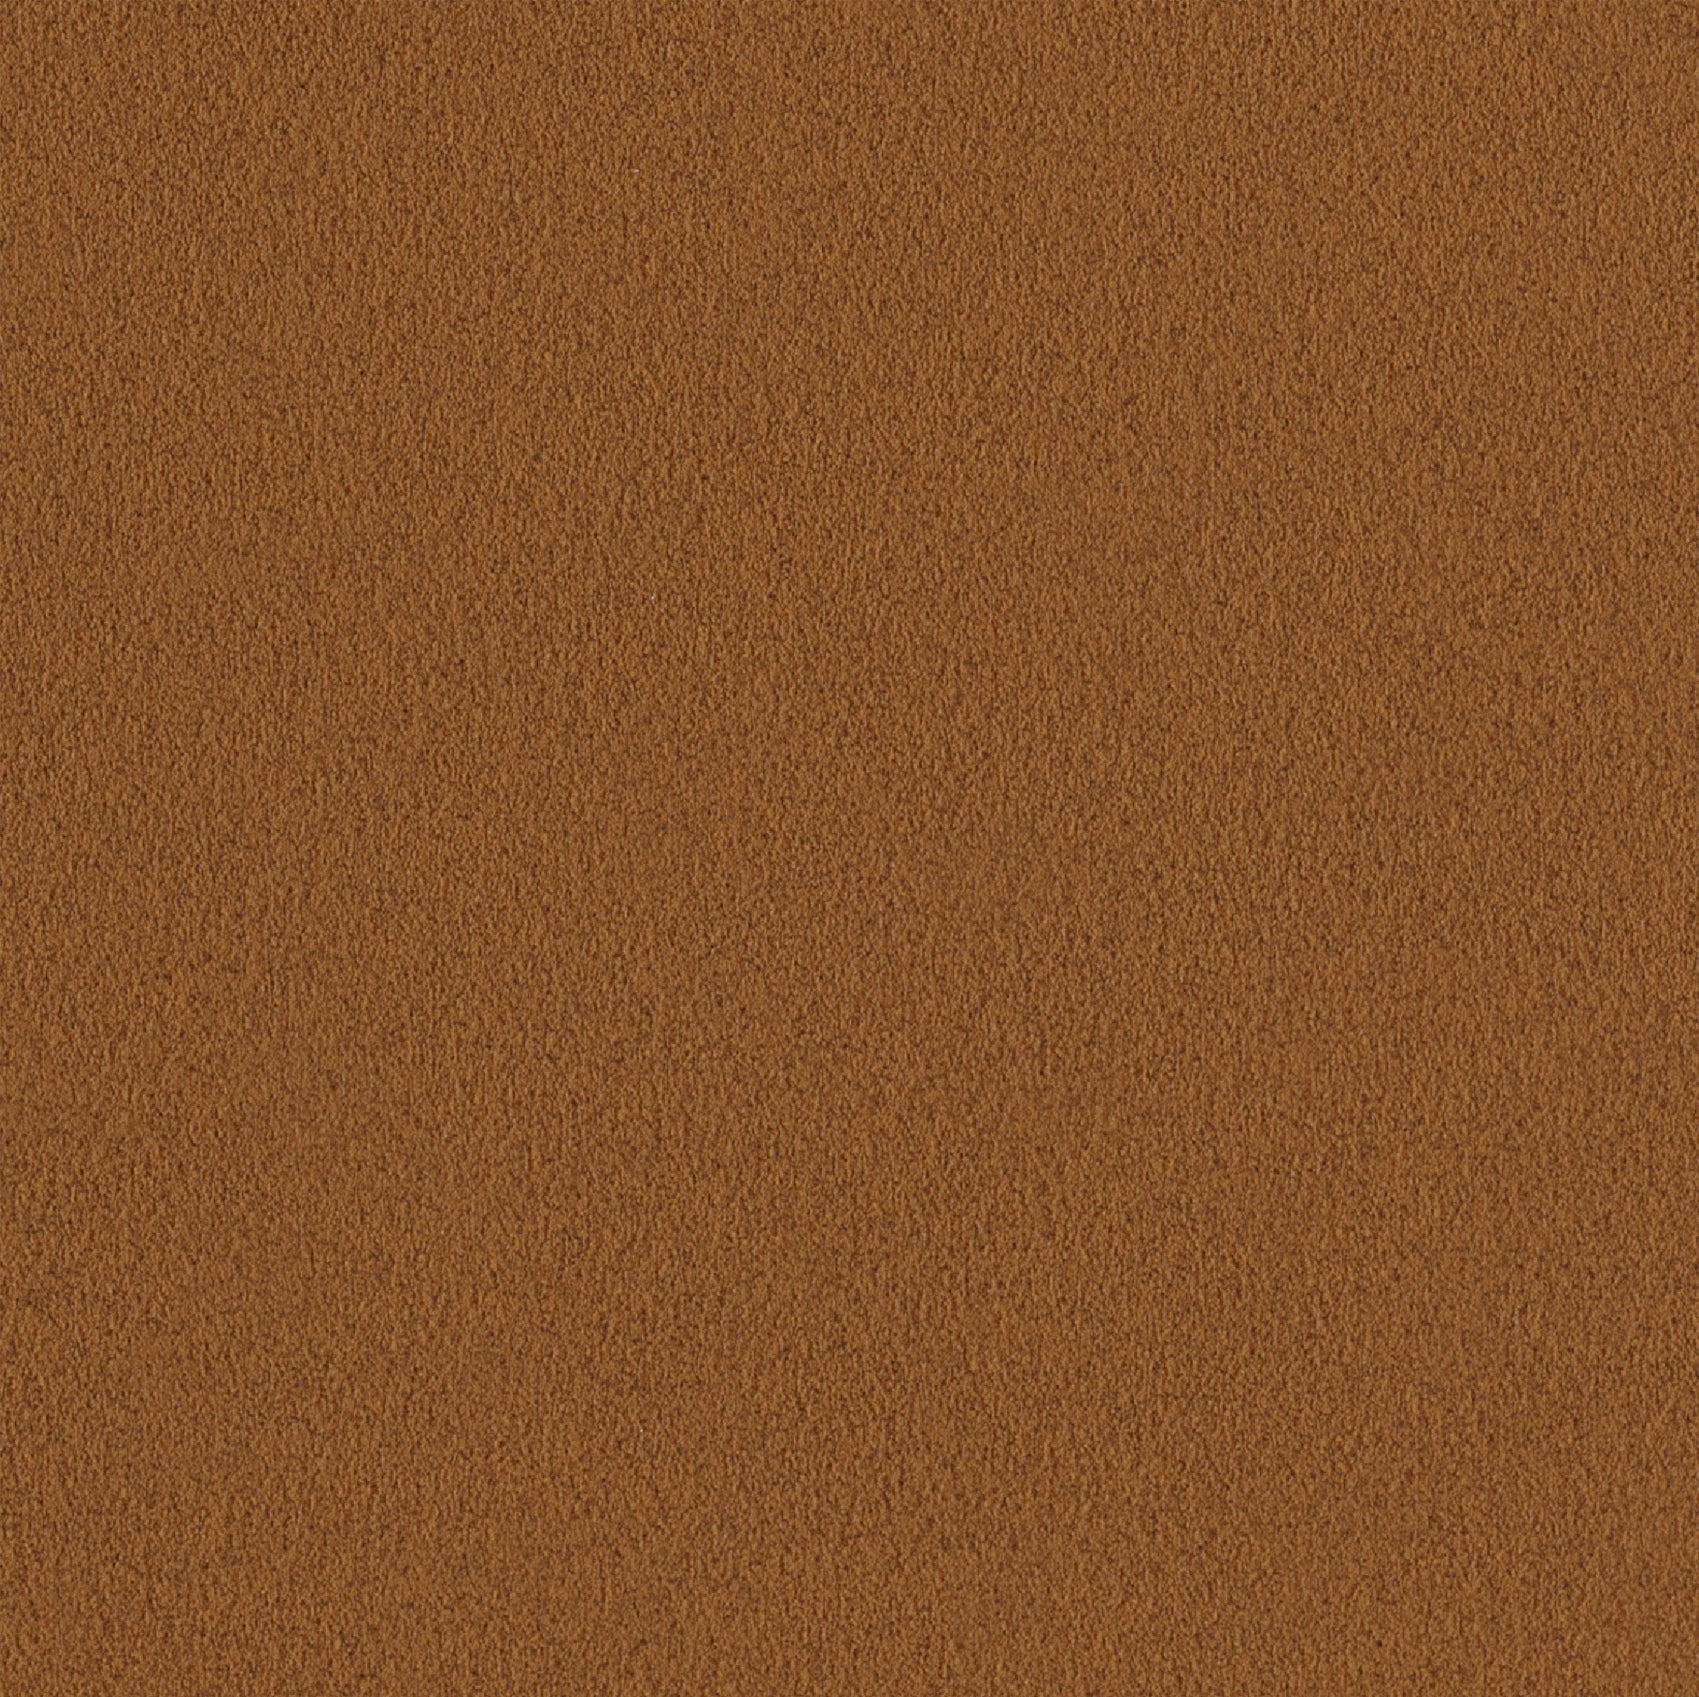 Andriali-Contract-Vinyl_Upholstery-Design-Serenity-Color-250DarkCheddar-Width-